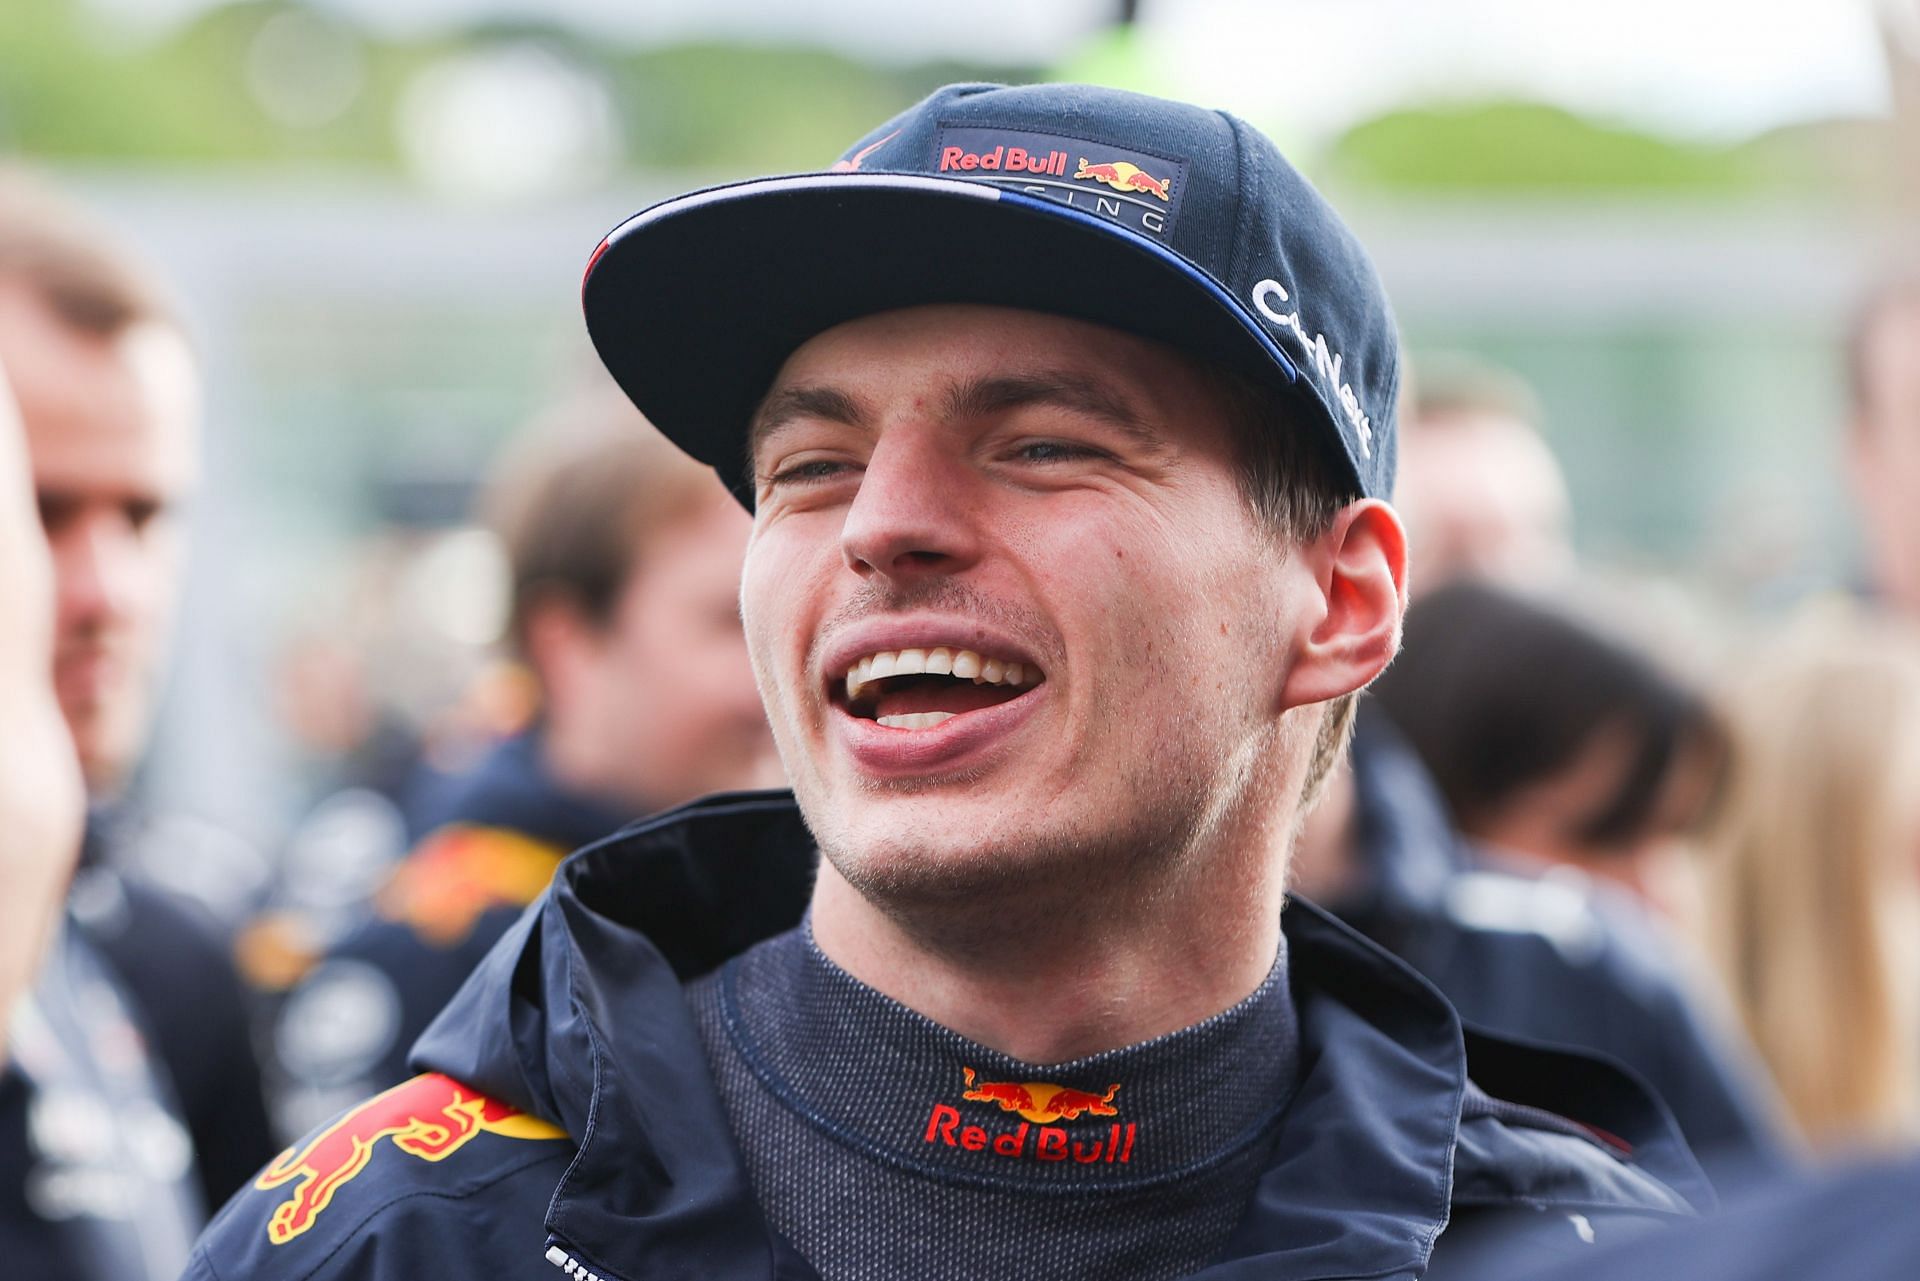 Max Verstappen was the standout driver throughout the weekend